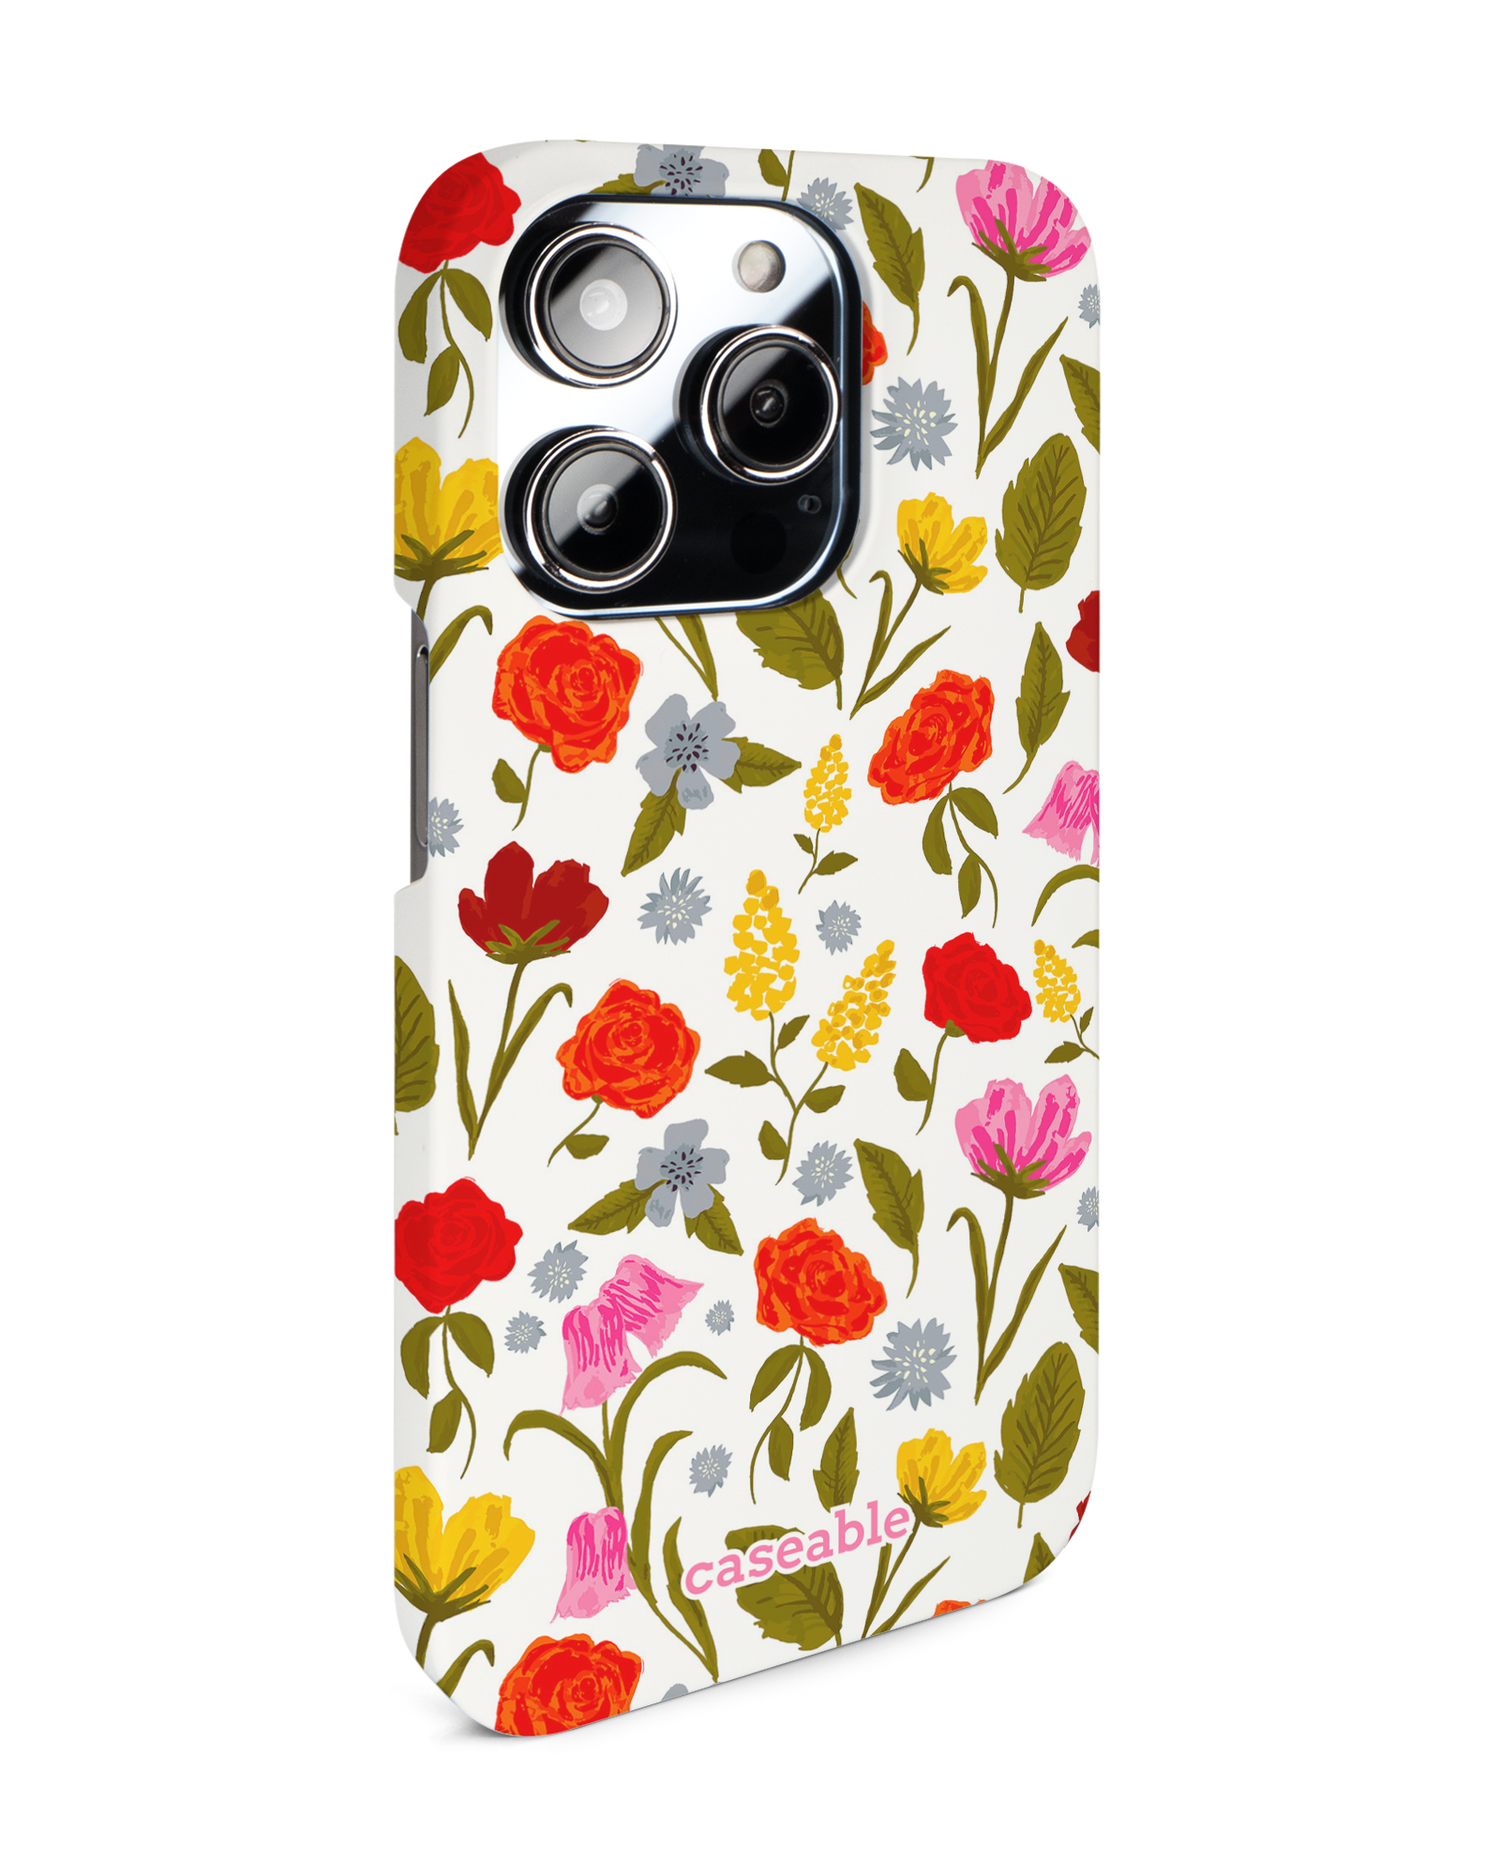 Botanical Beauties Hard Shell Phone Case for Apple iPhone 14 Pro: View from the left side